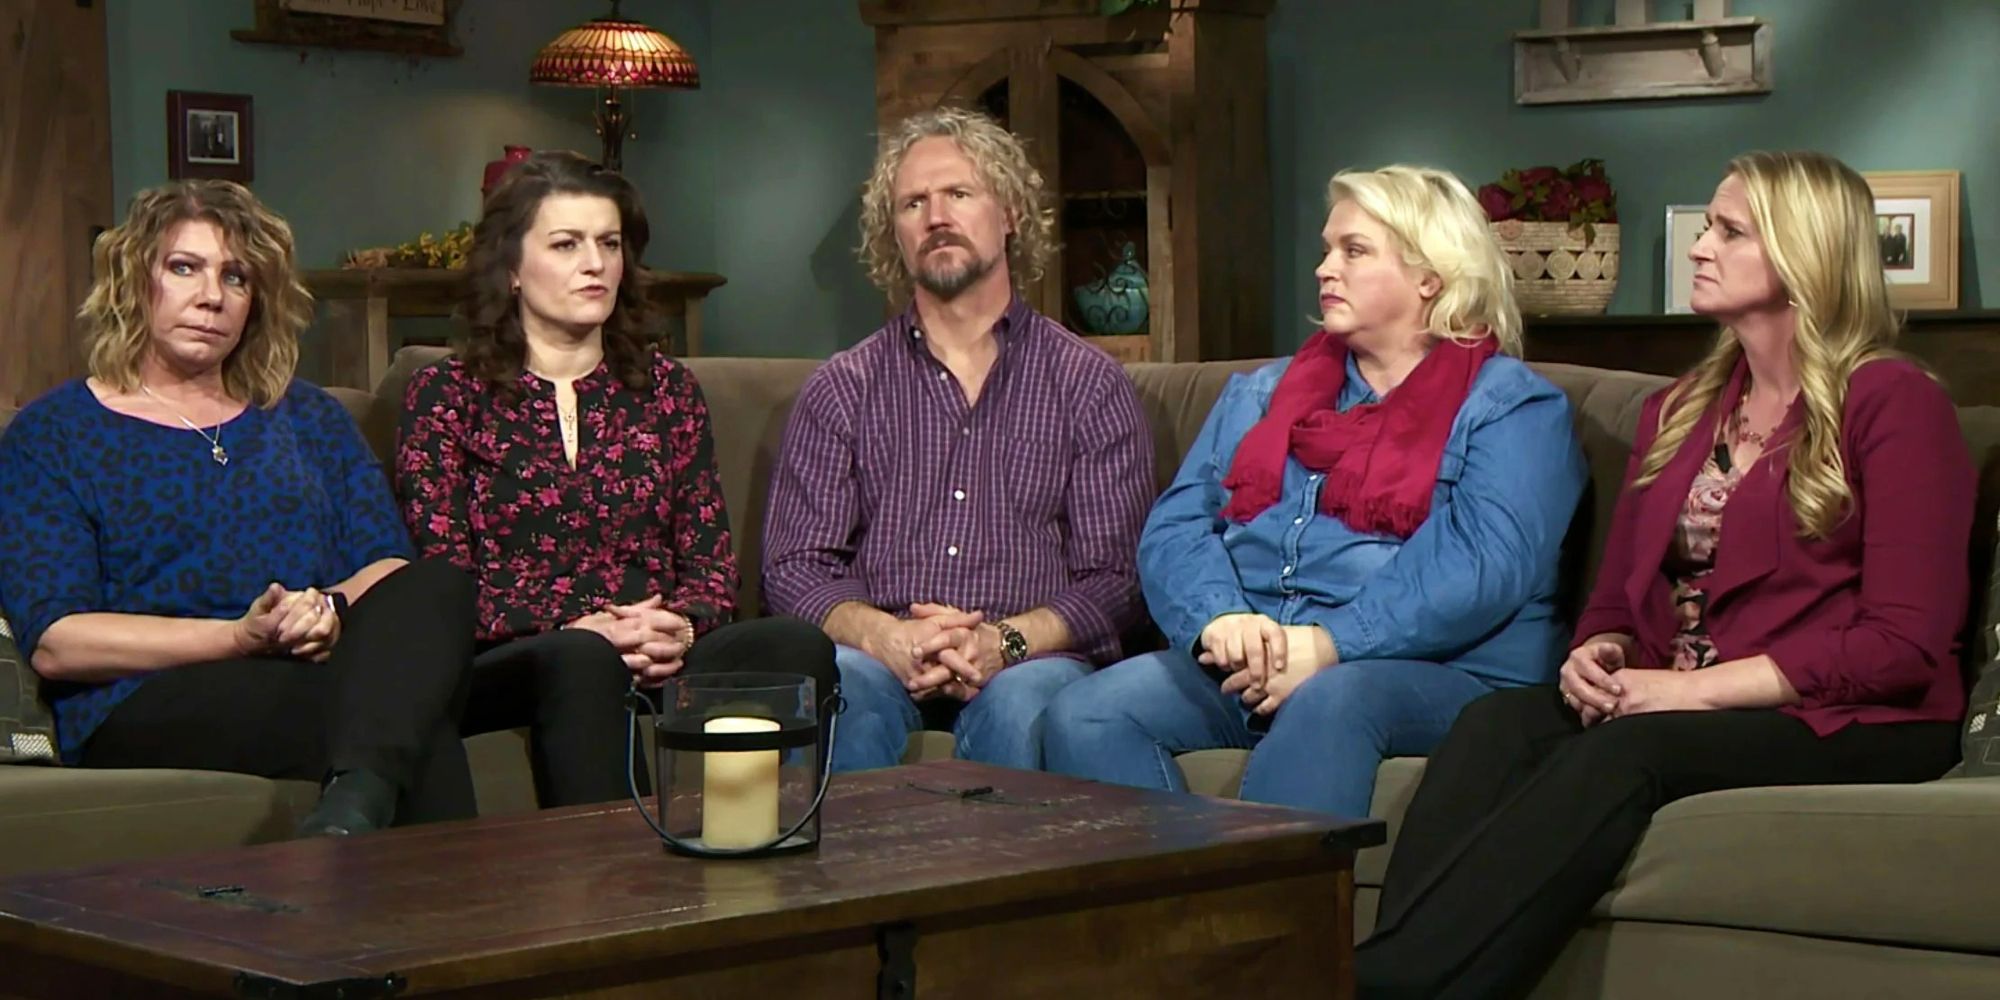 Sister Wives Cast